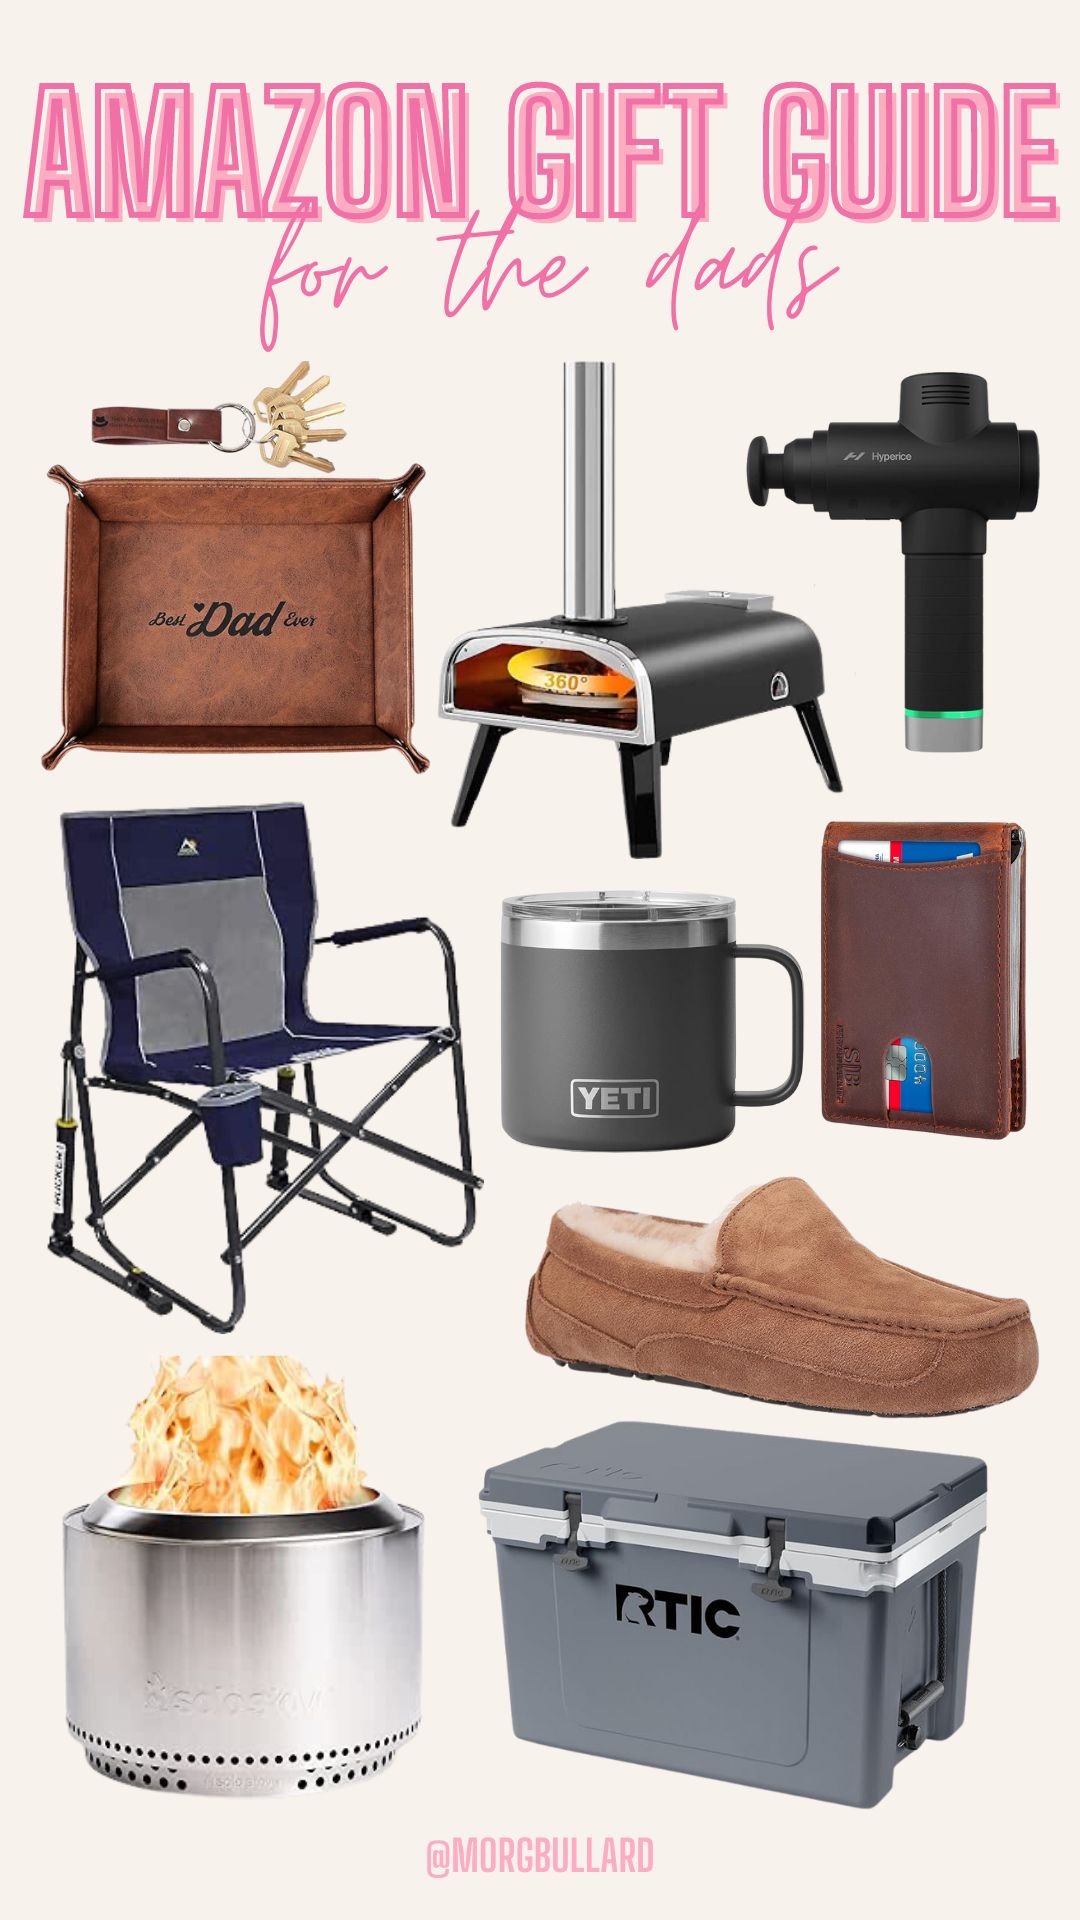 Gift Guide for Dads | Amazon (US)